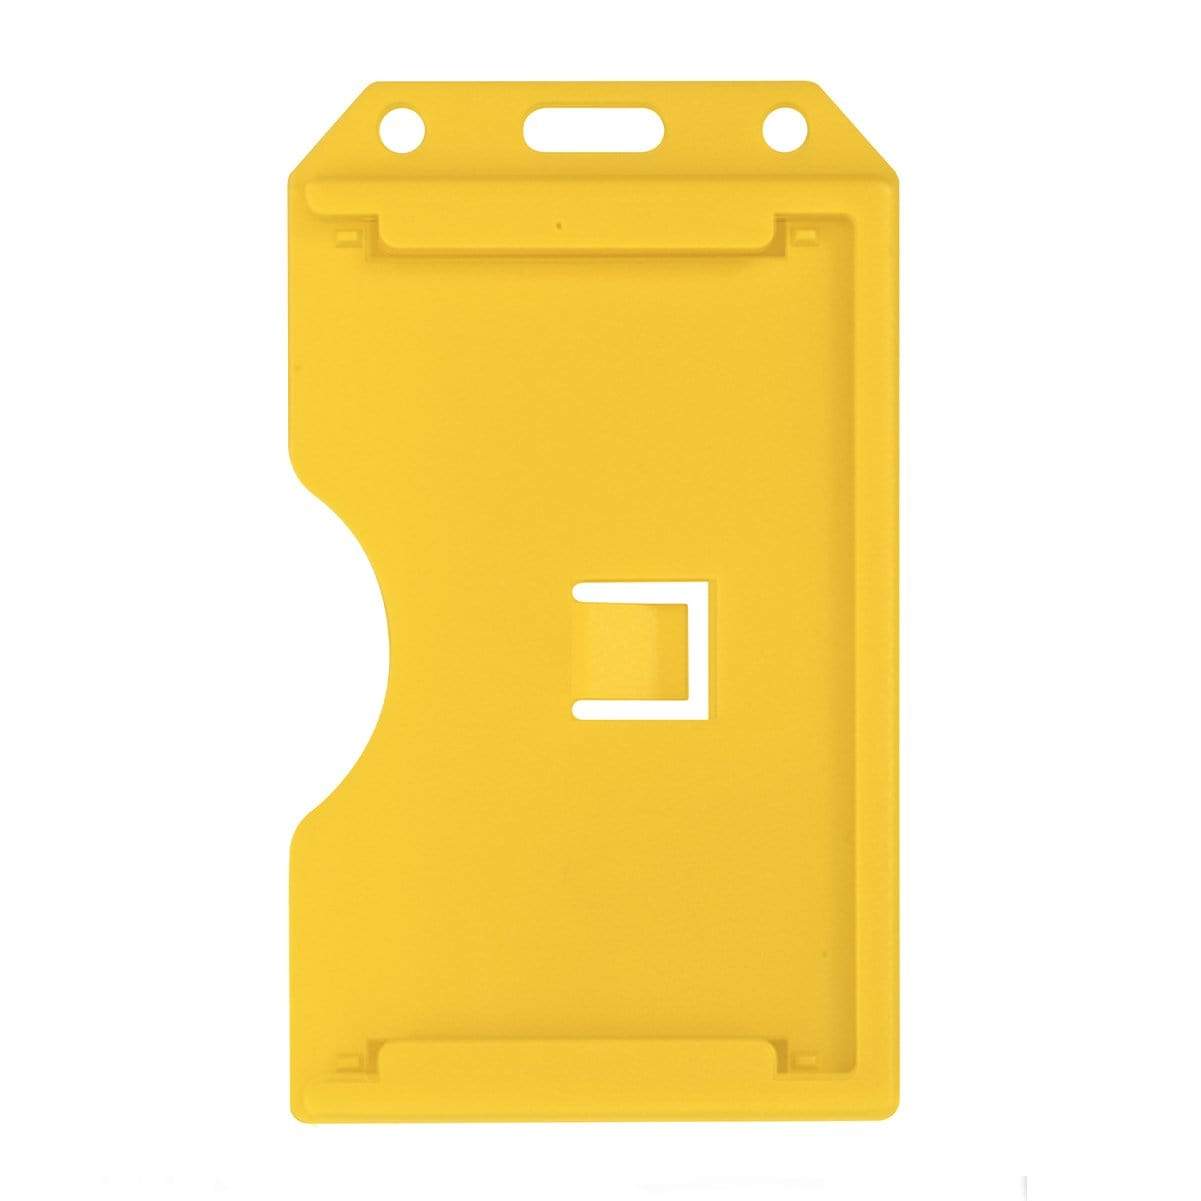 A 2 Sided Rigid Vertical MultiCard Badge Holder - Hard Plastic Multiple ID Card Holder (1840-308X) with a rectangular slot in the middle and a notch on the left side. This sturdy model, identified as 1840-308X, ensures secure and practical use for daily identification needs.